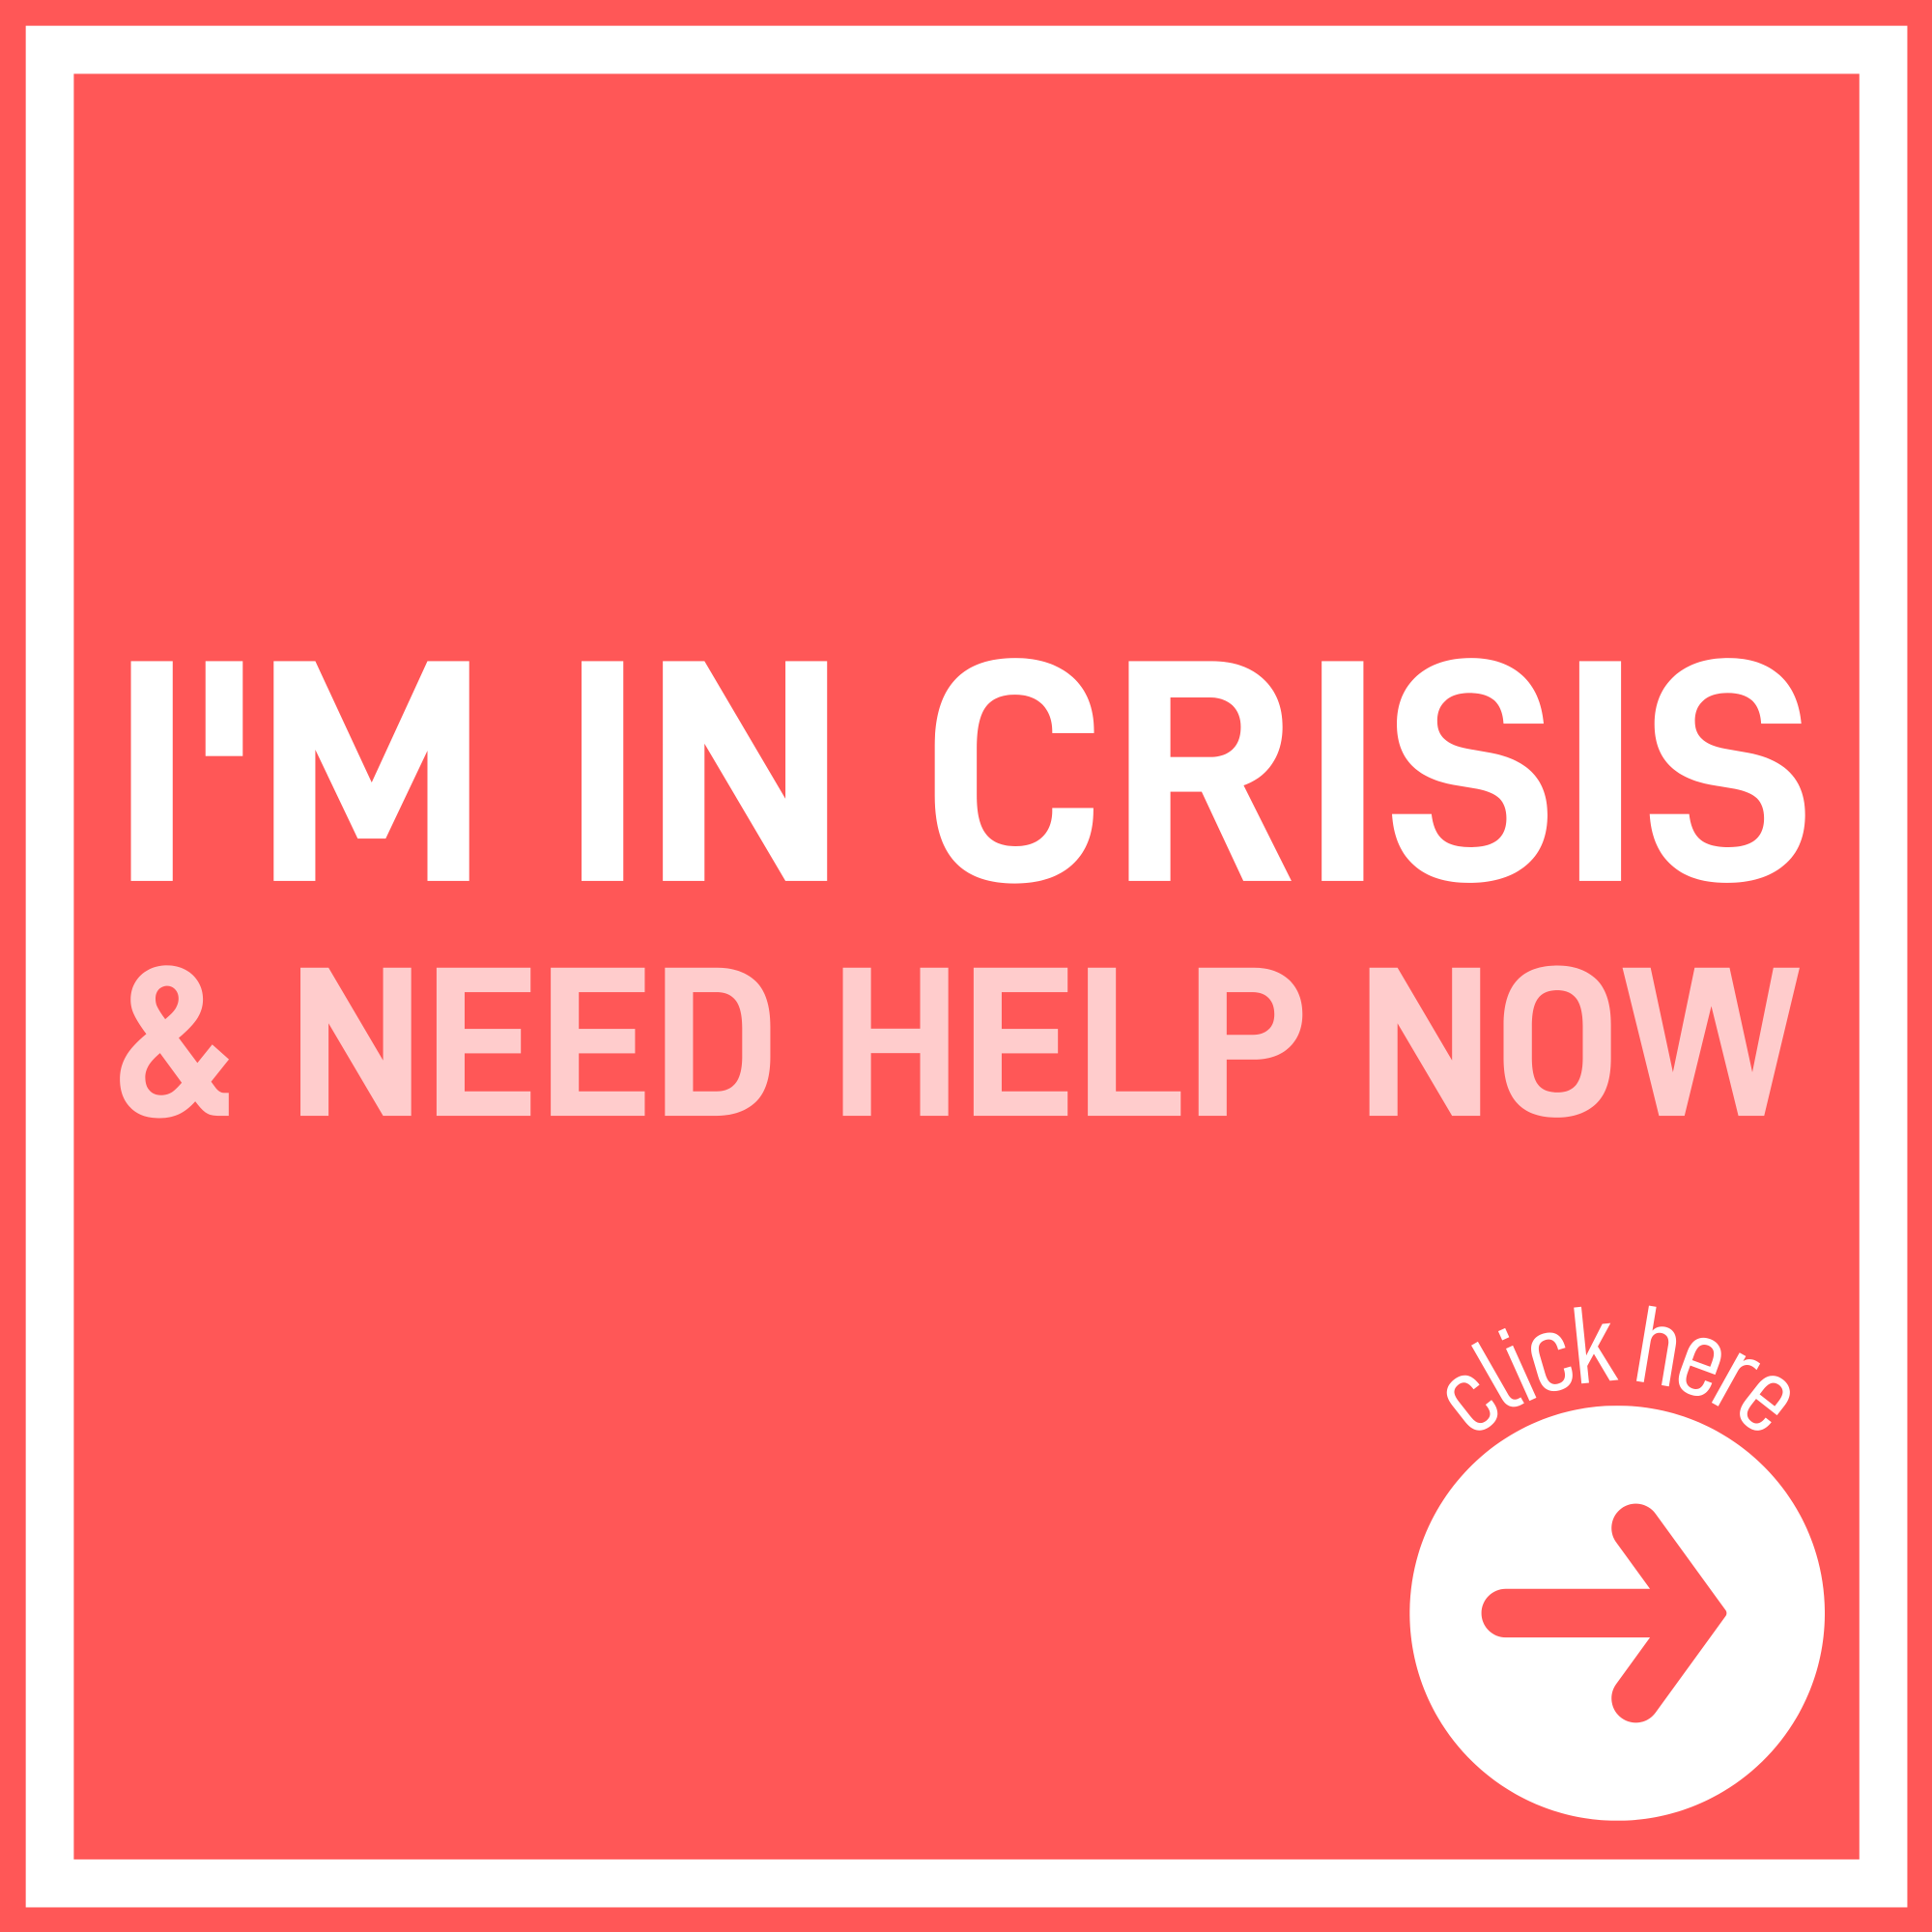 Red button with white text that says "I'm in crisis and need help now"